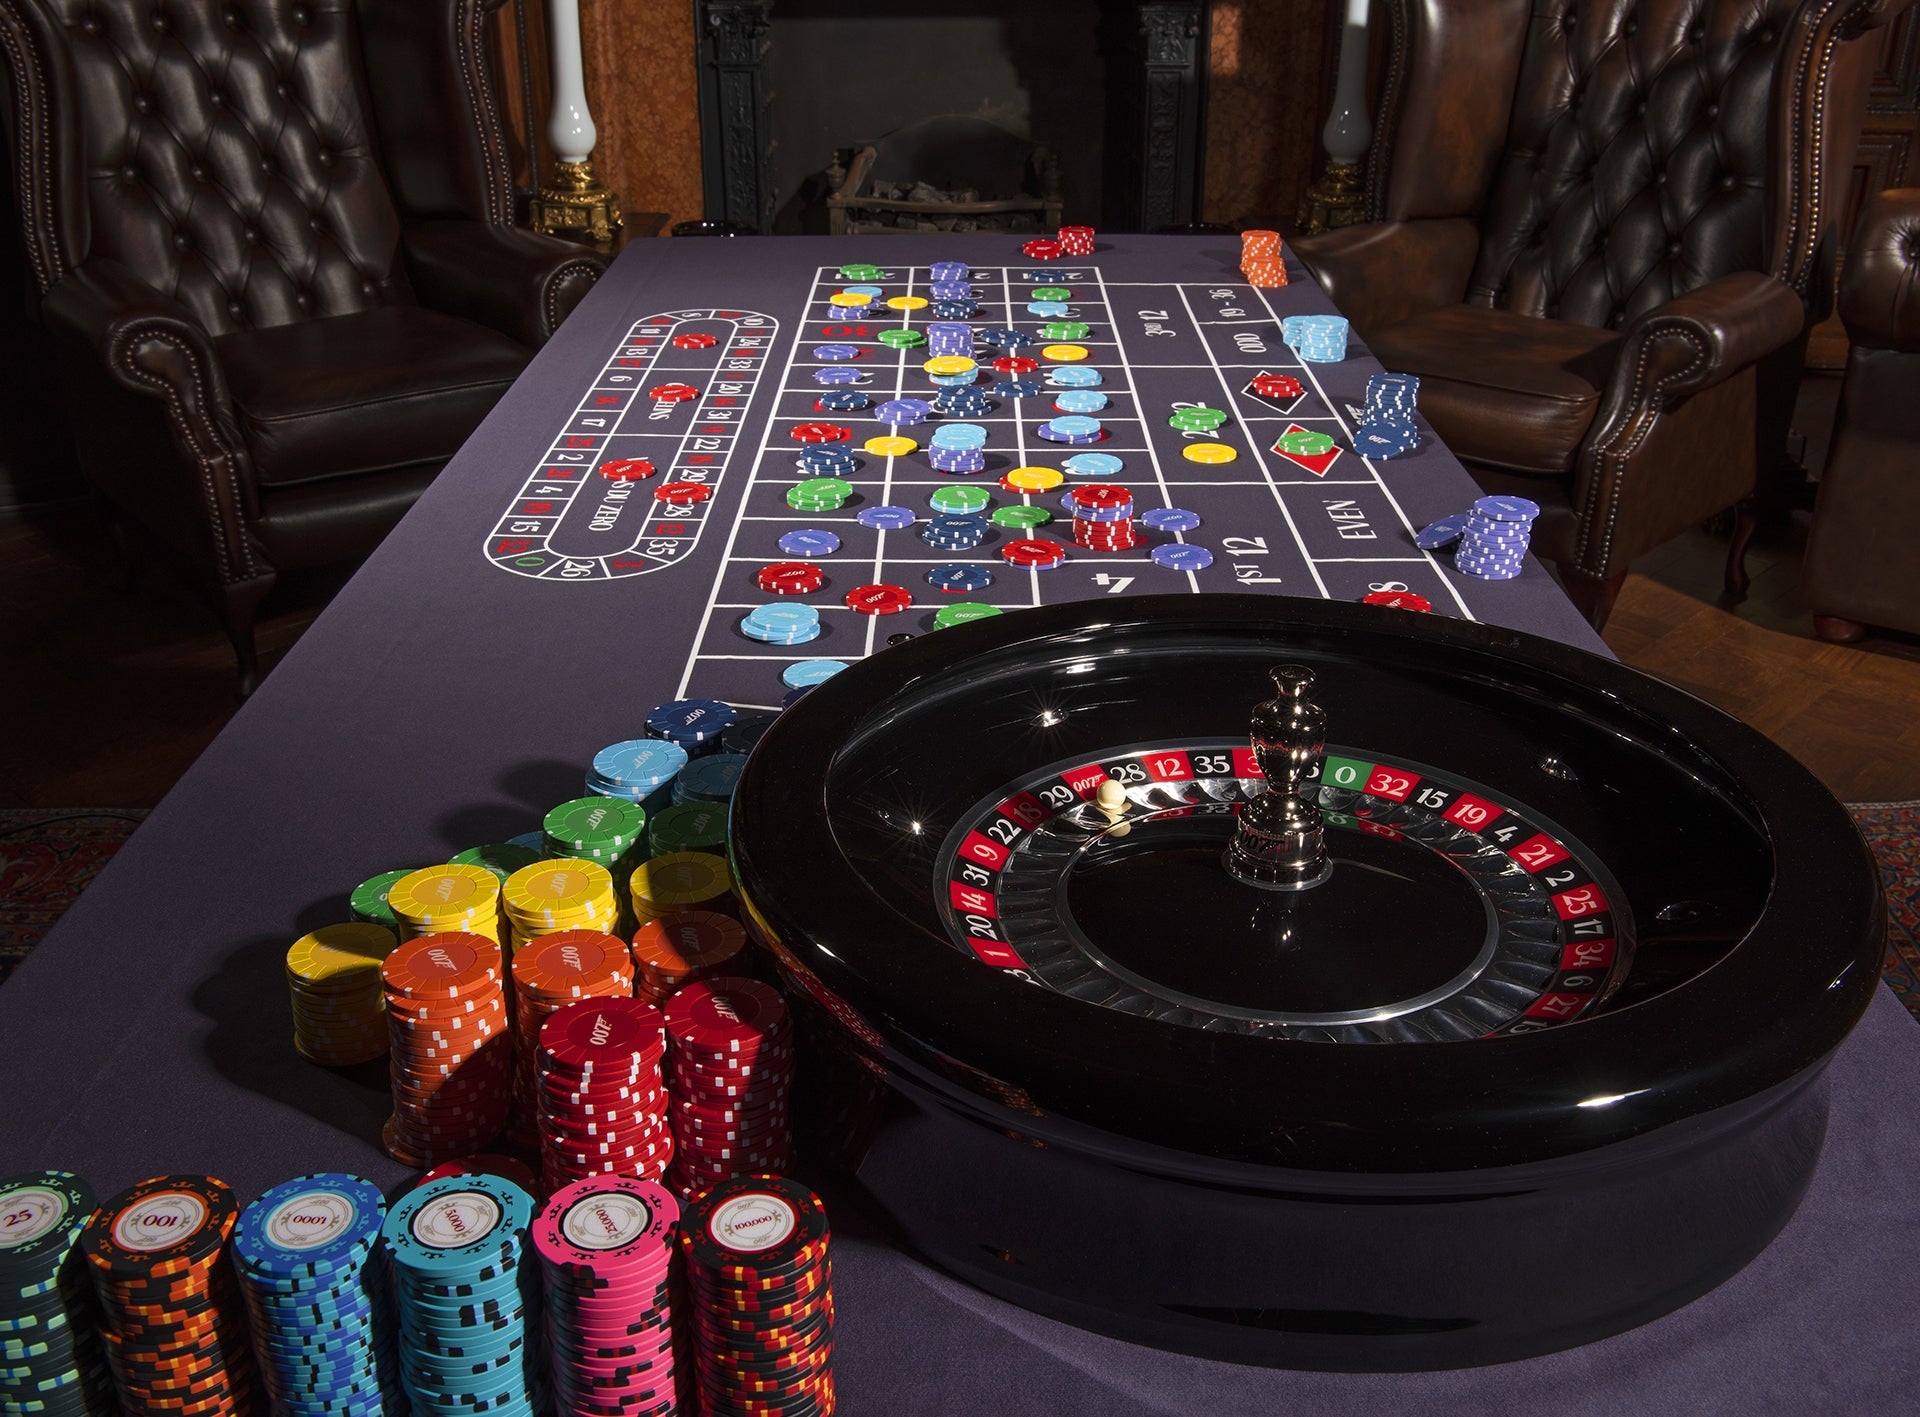 The 007 Collector’s Edition Roulette Wheel